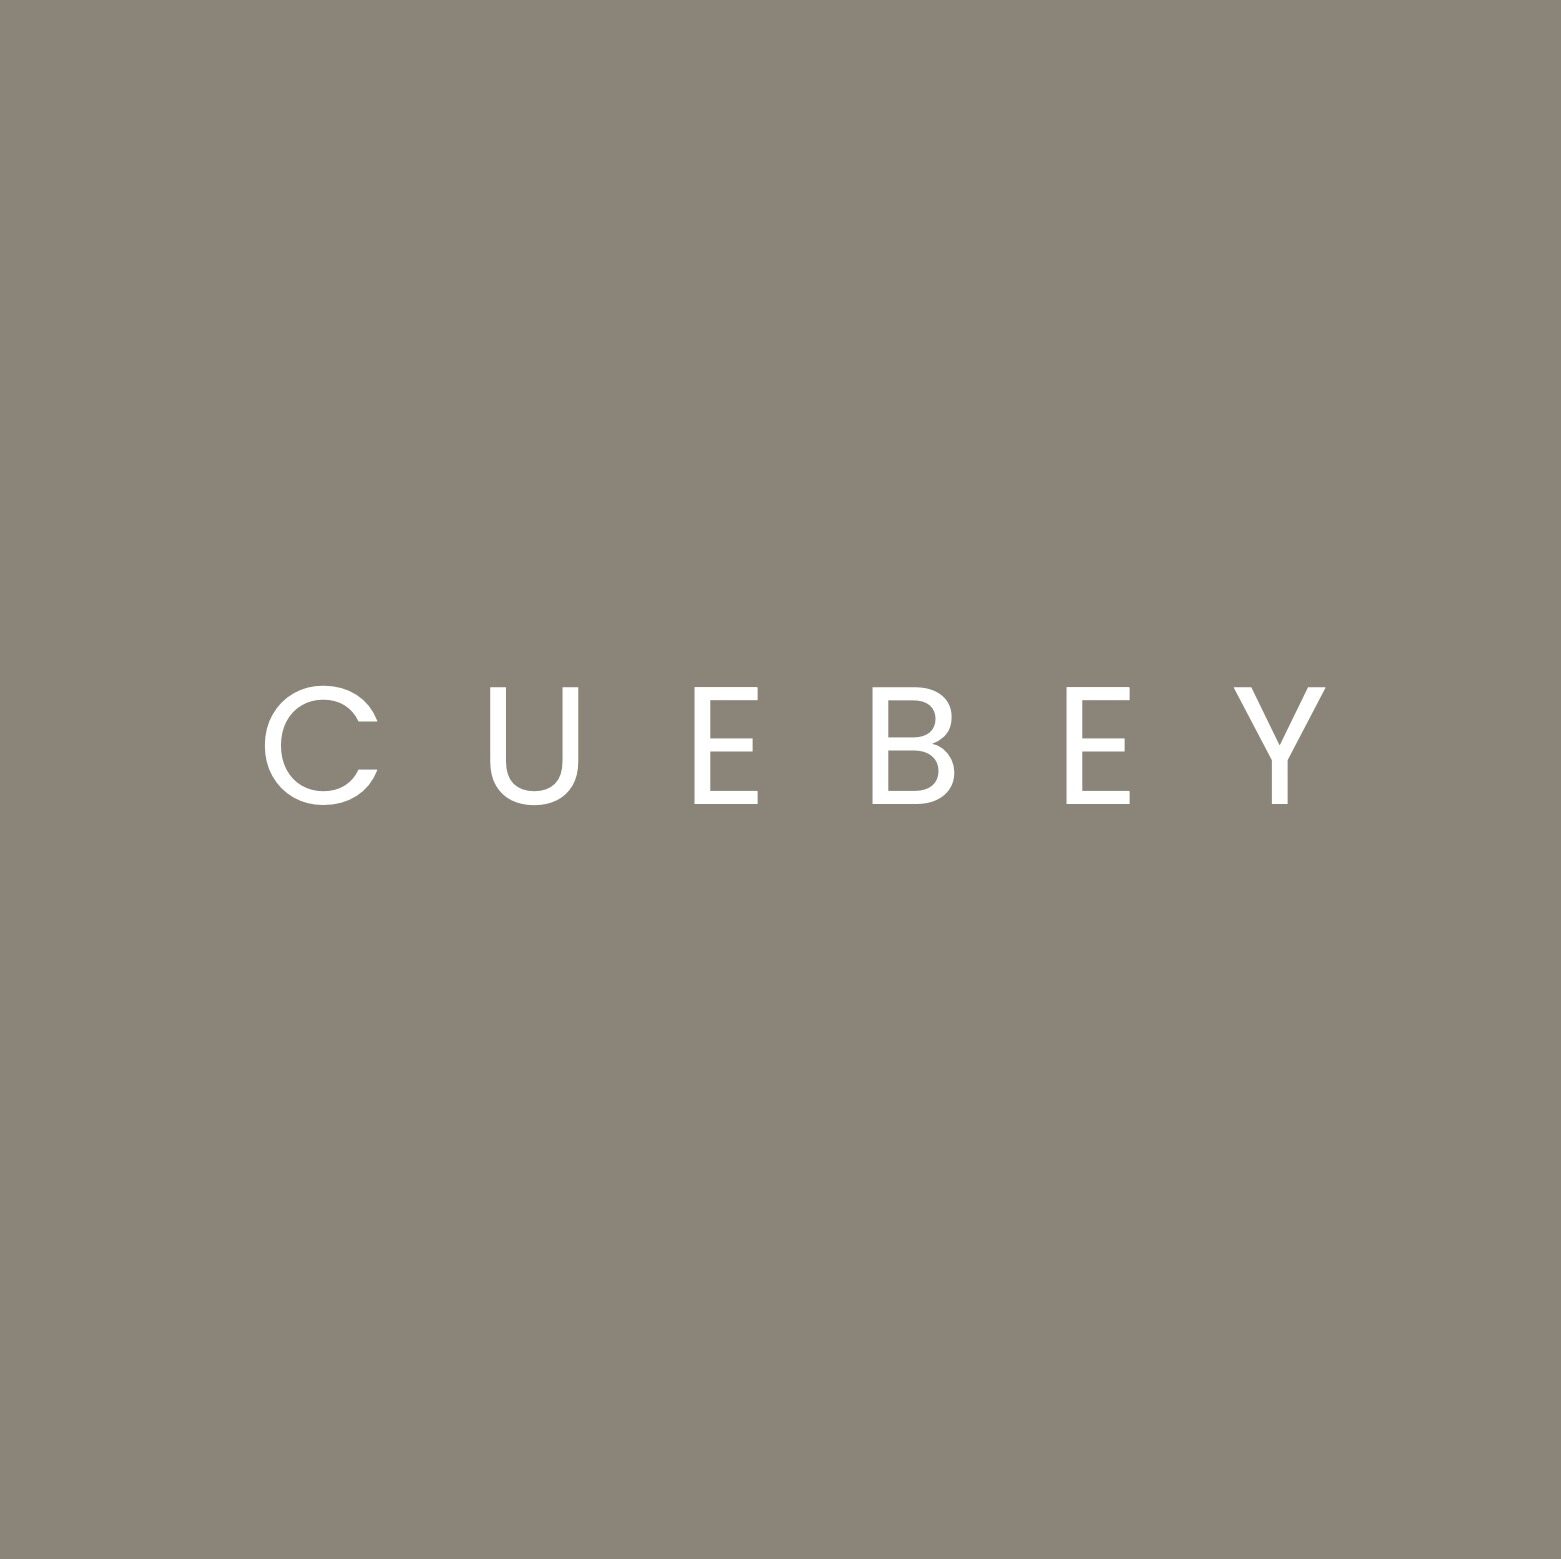 Cuebey